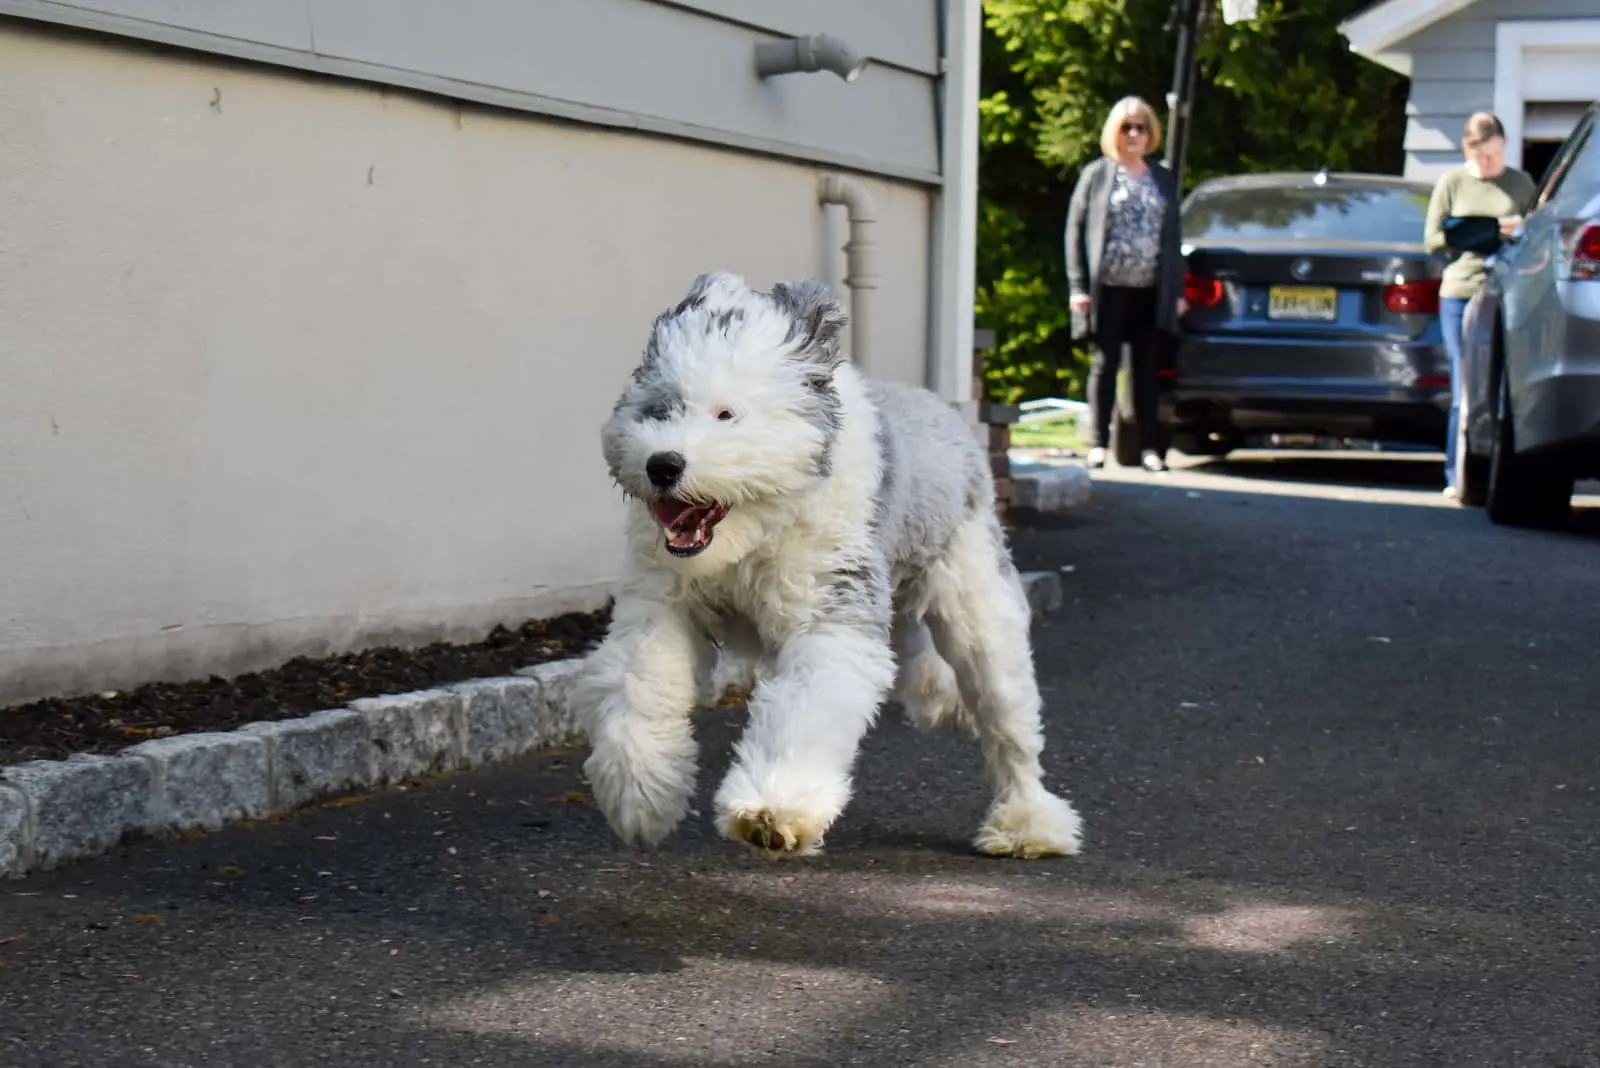 The sheepadoodle puppy runs merrily down the street